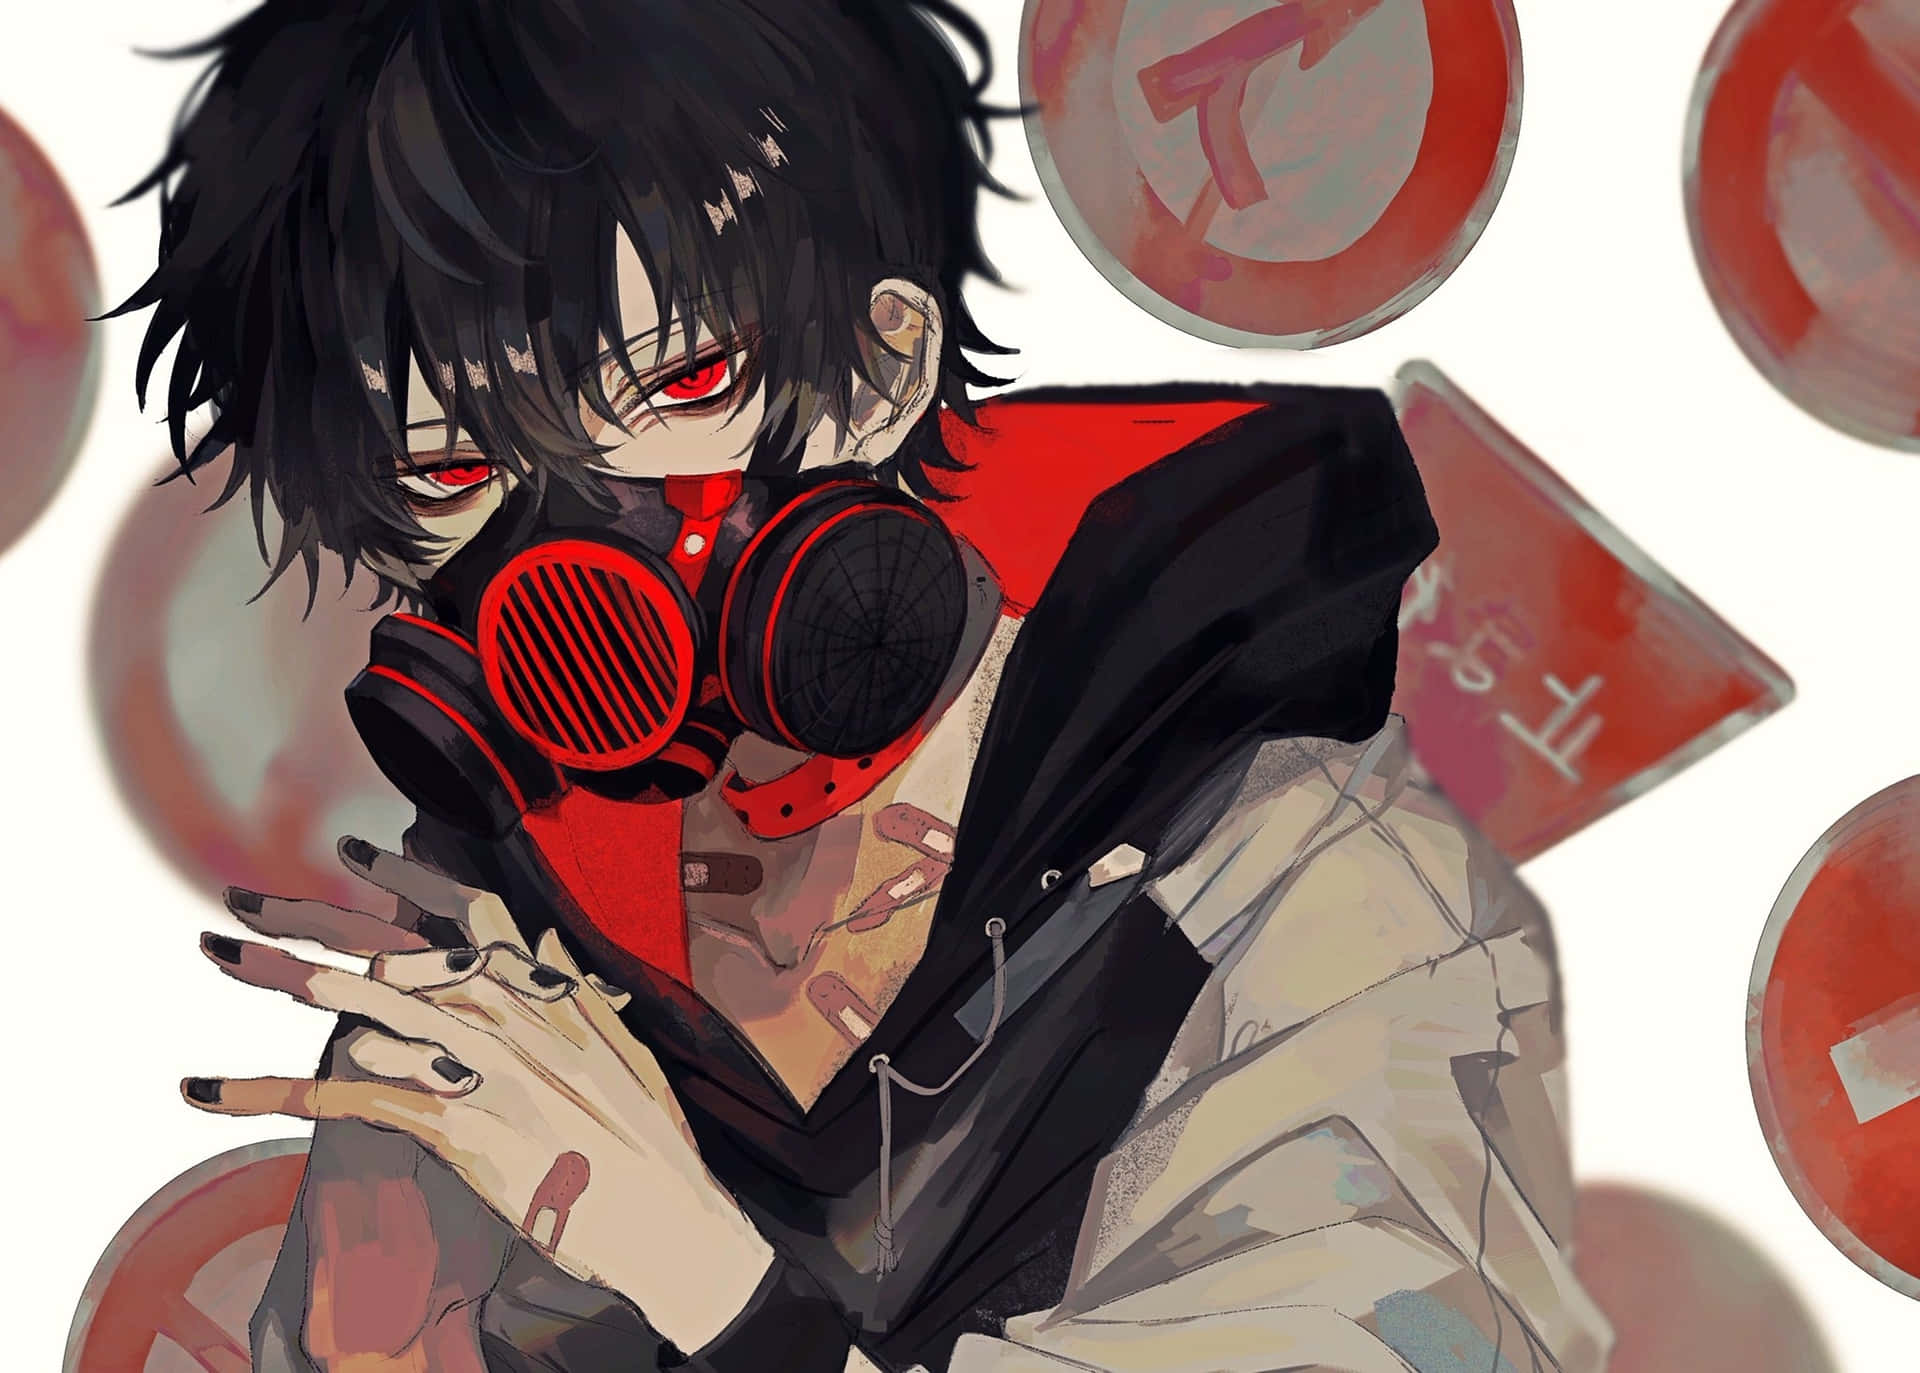 Anime Boy with Mask: Dark and Mysterious